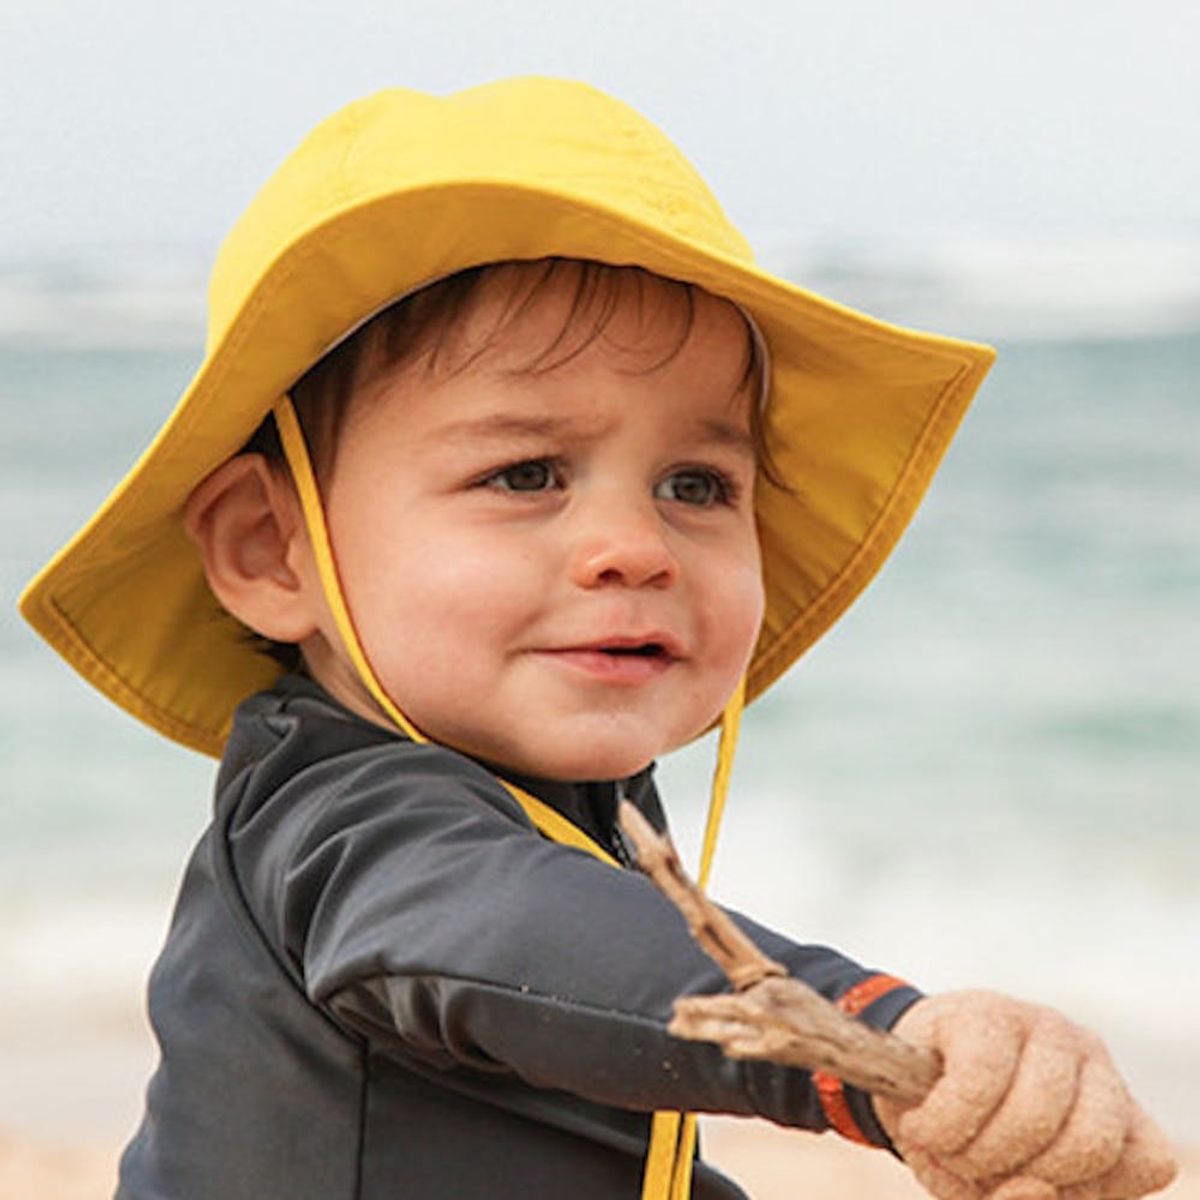 10 Ways Beyond Sunscreen to Protect Kiddos from the Sun